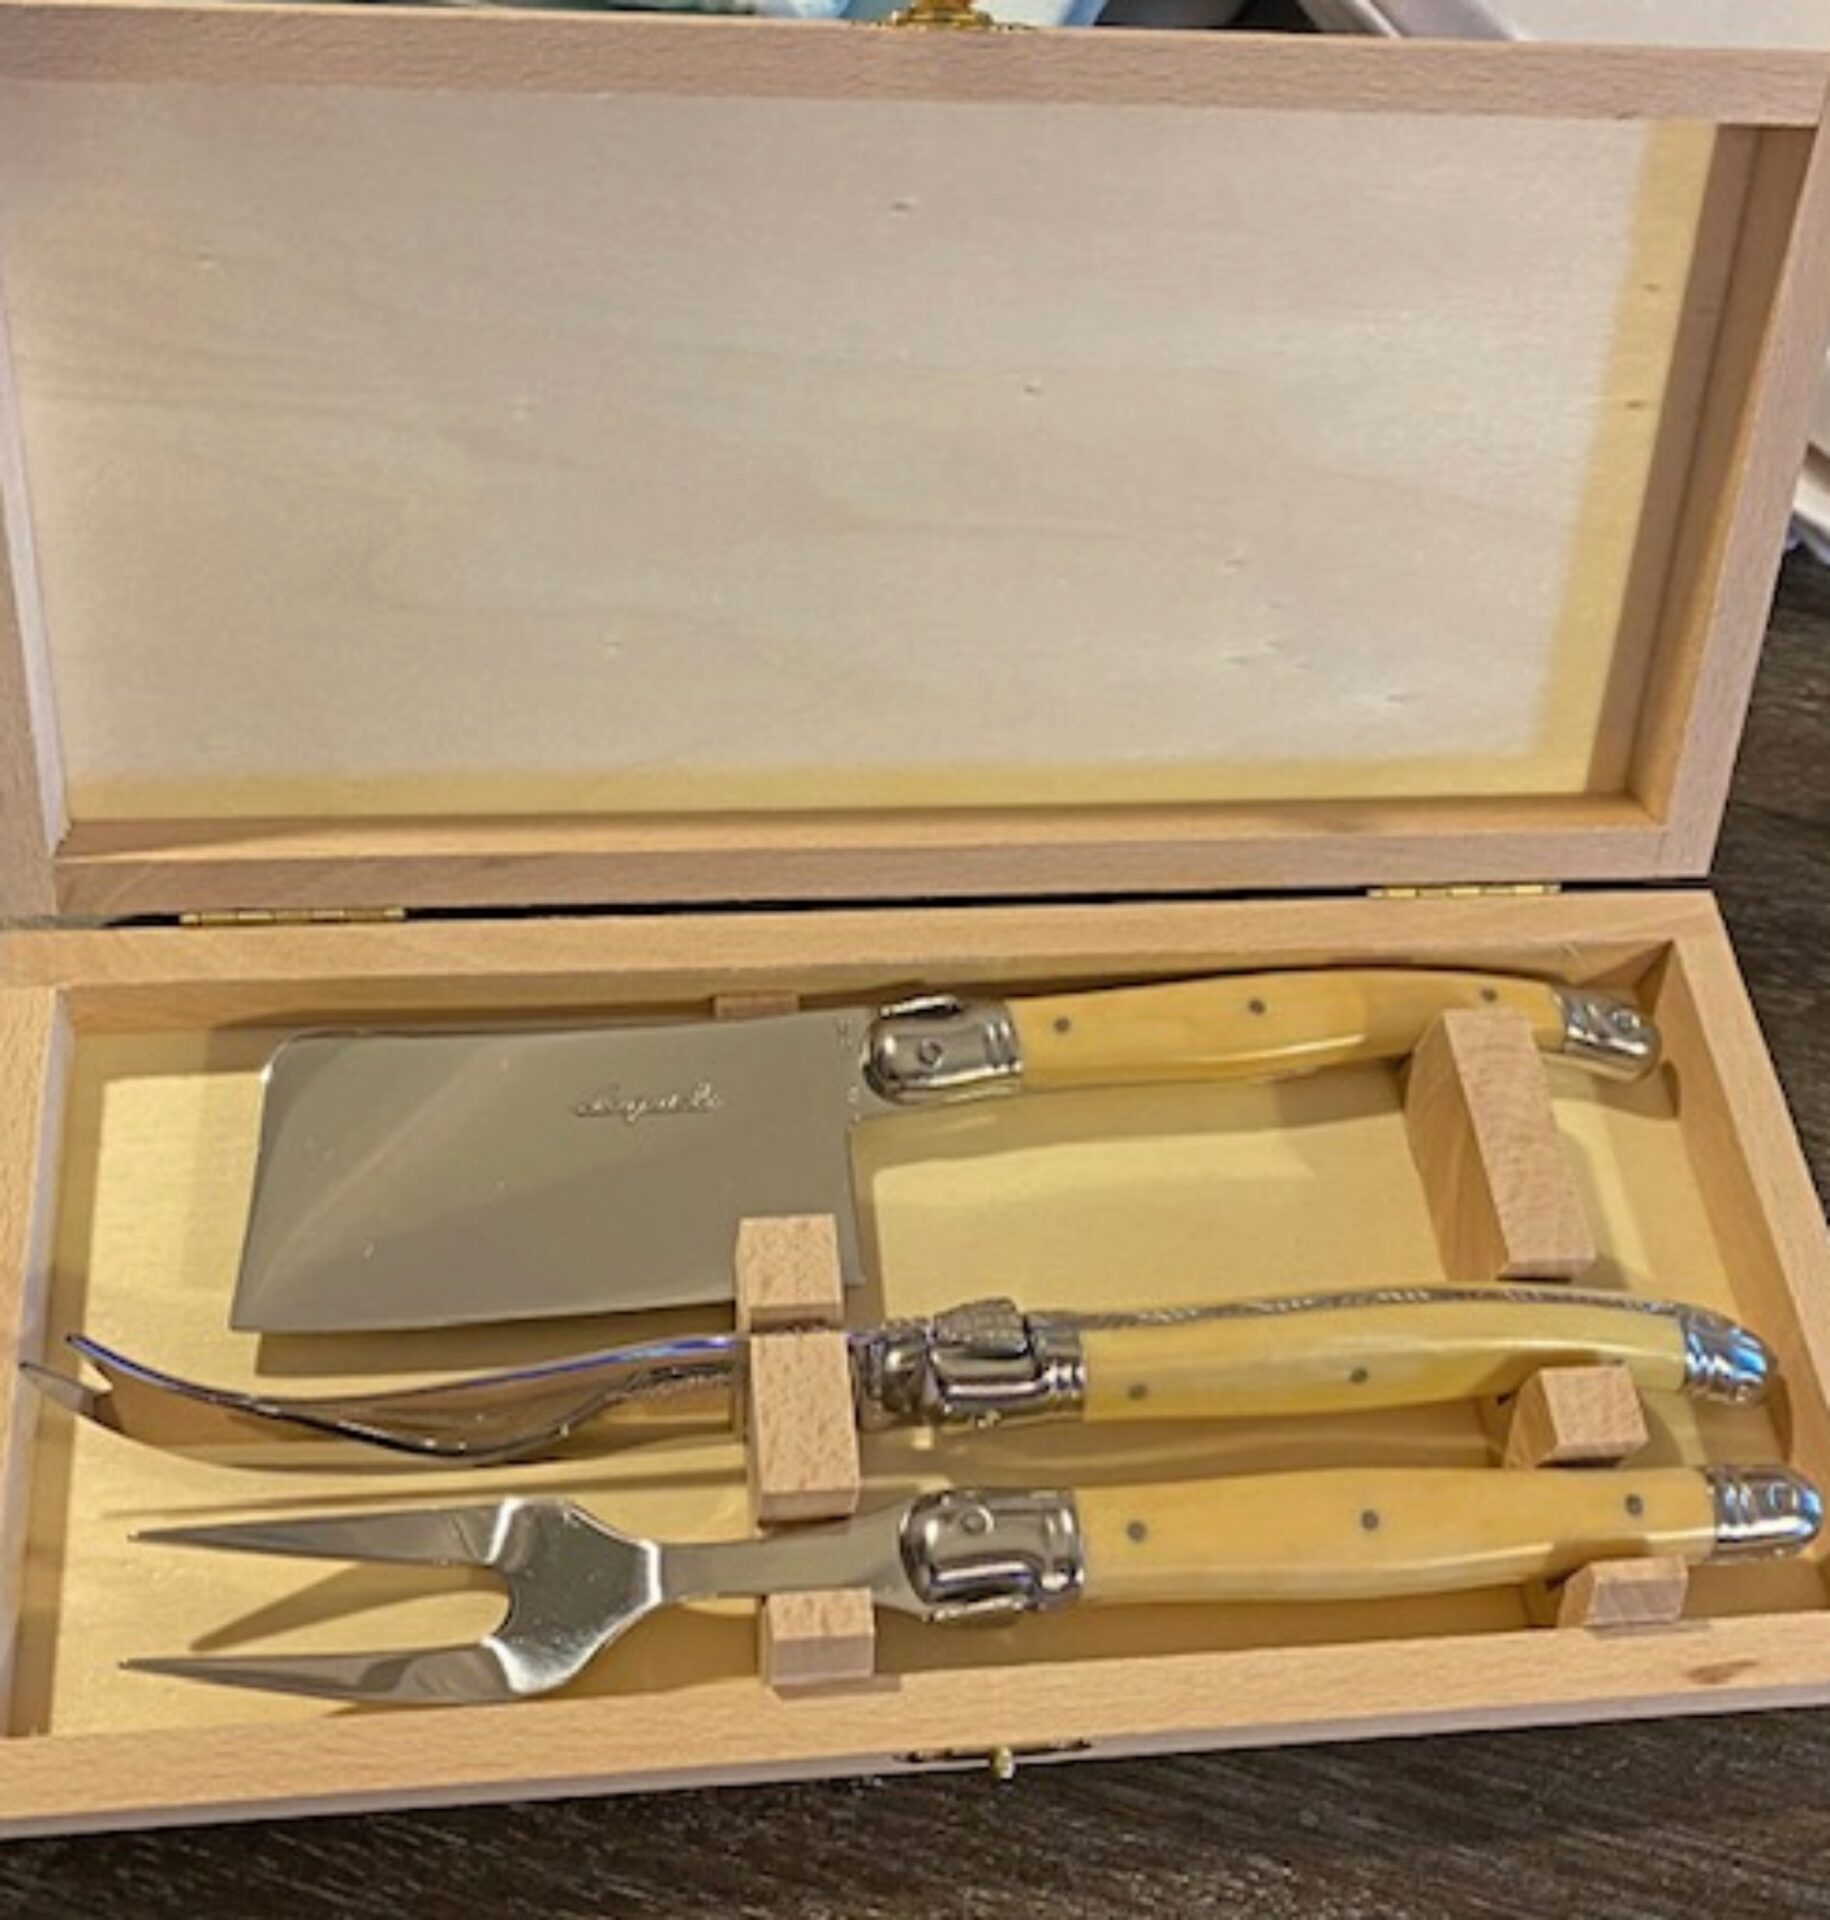 Wooden Handle Stainless Steel Cutlery Set in a Box